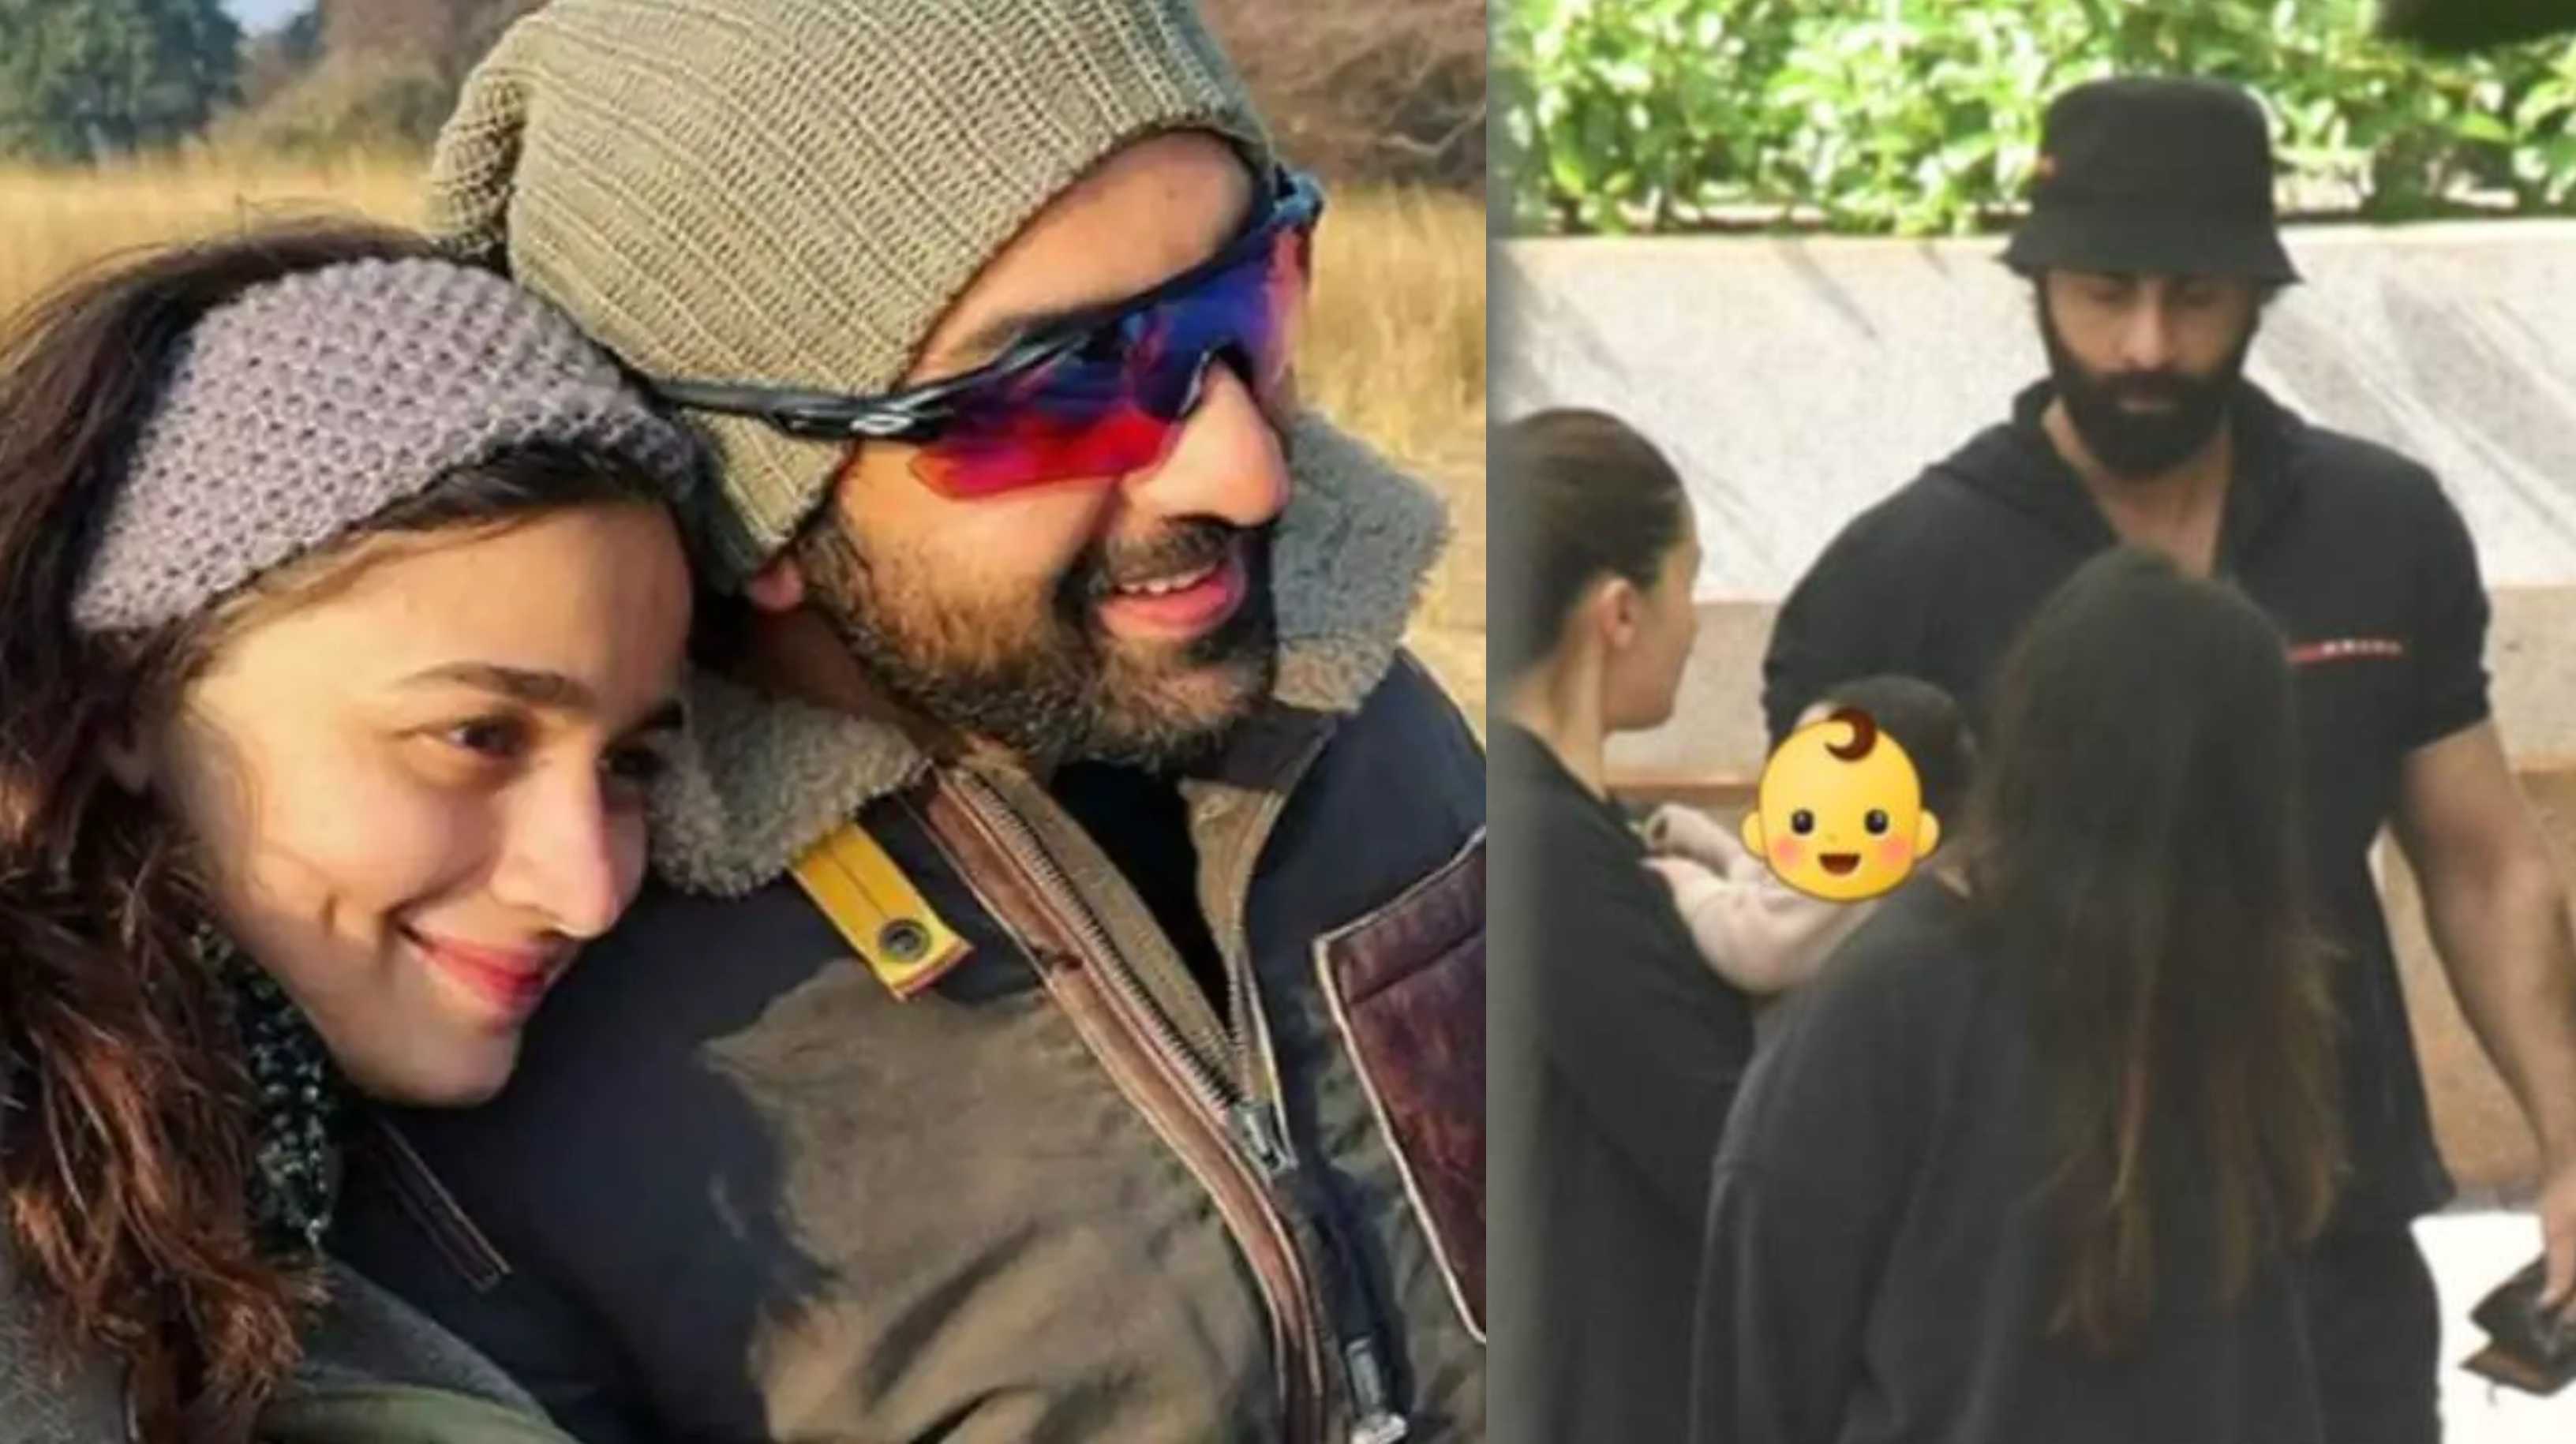 Ranbir Kapoor wants Raha to have Alia Bhatt’s looks but not her personality; says ‘I can’t have two…’